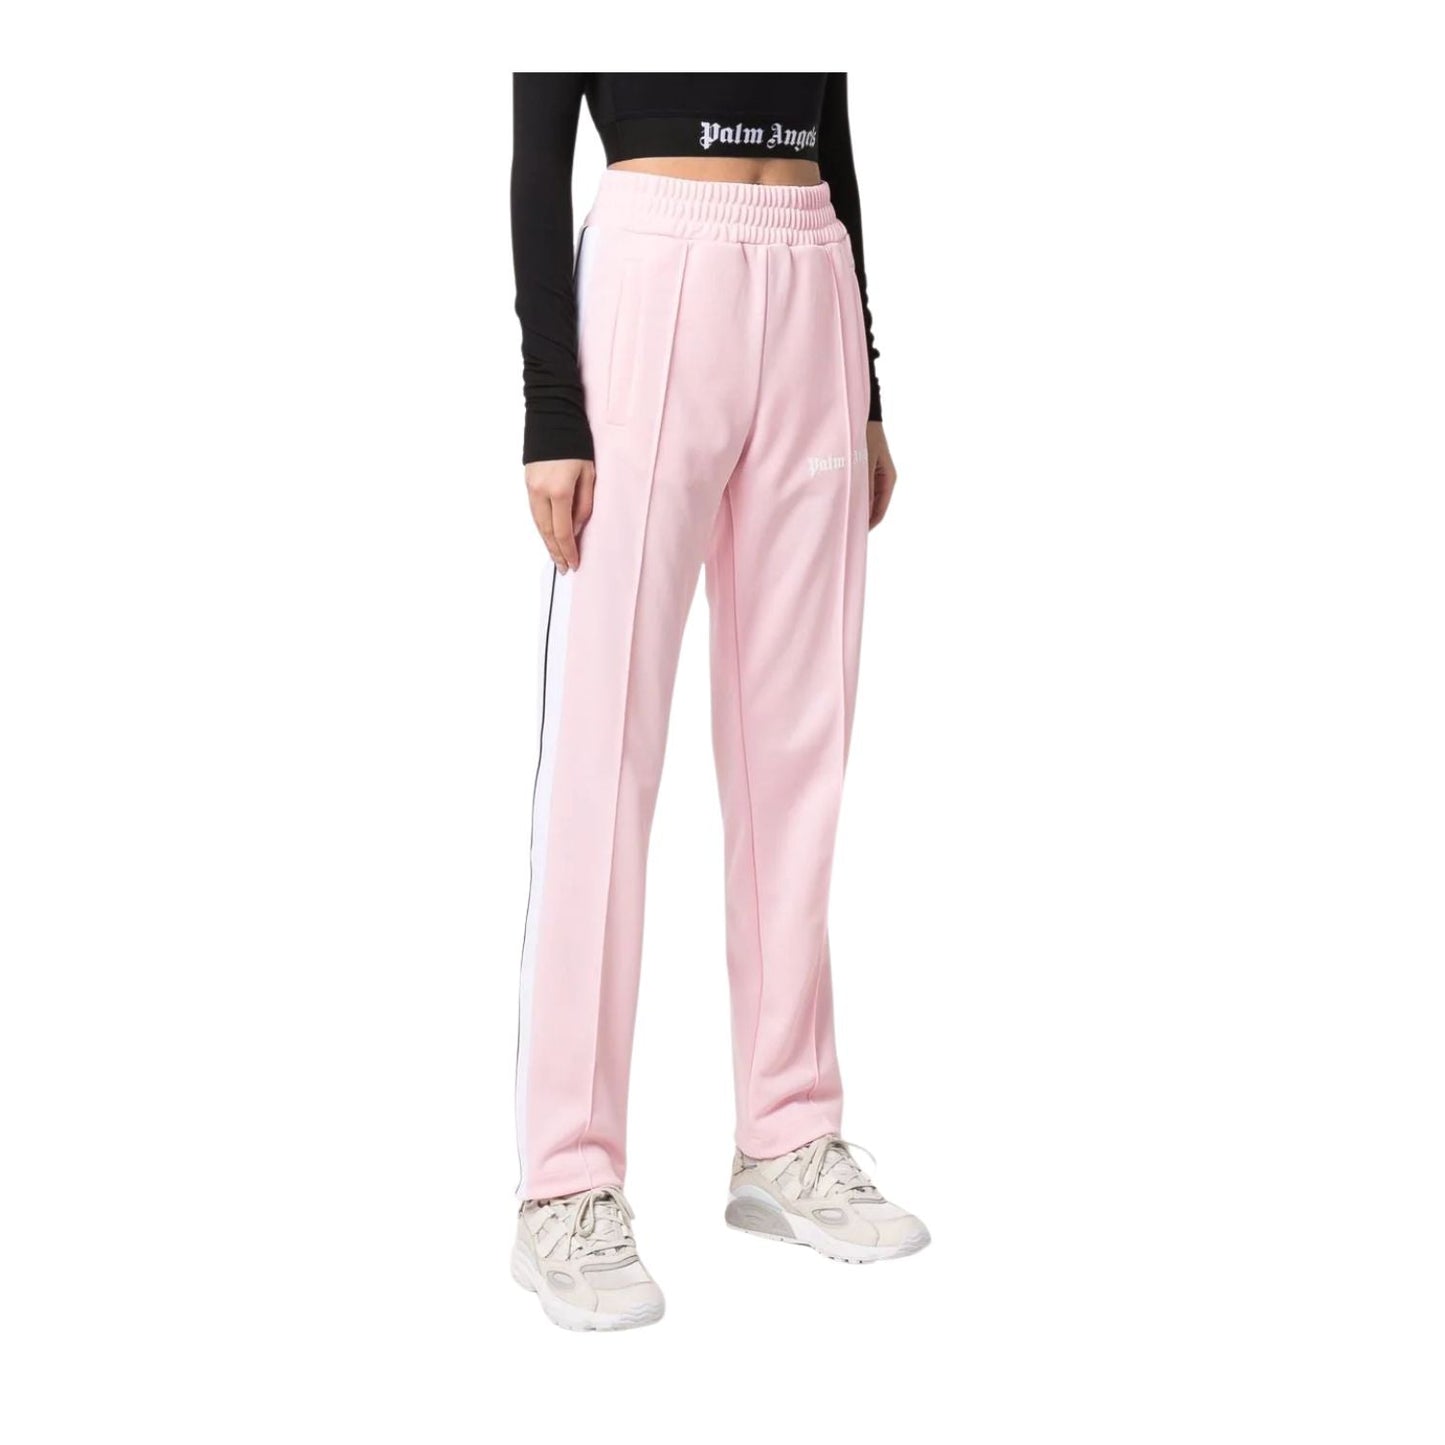 Palm Angels Womens Track Pants Almond Blossom/White